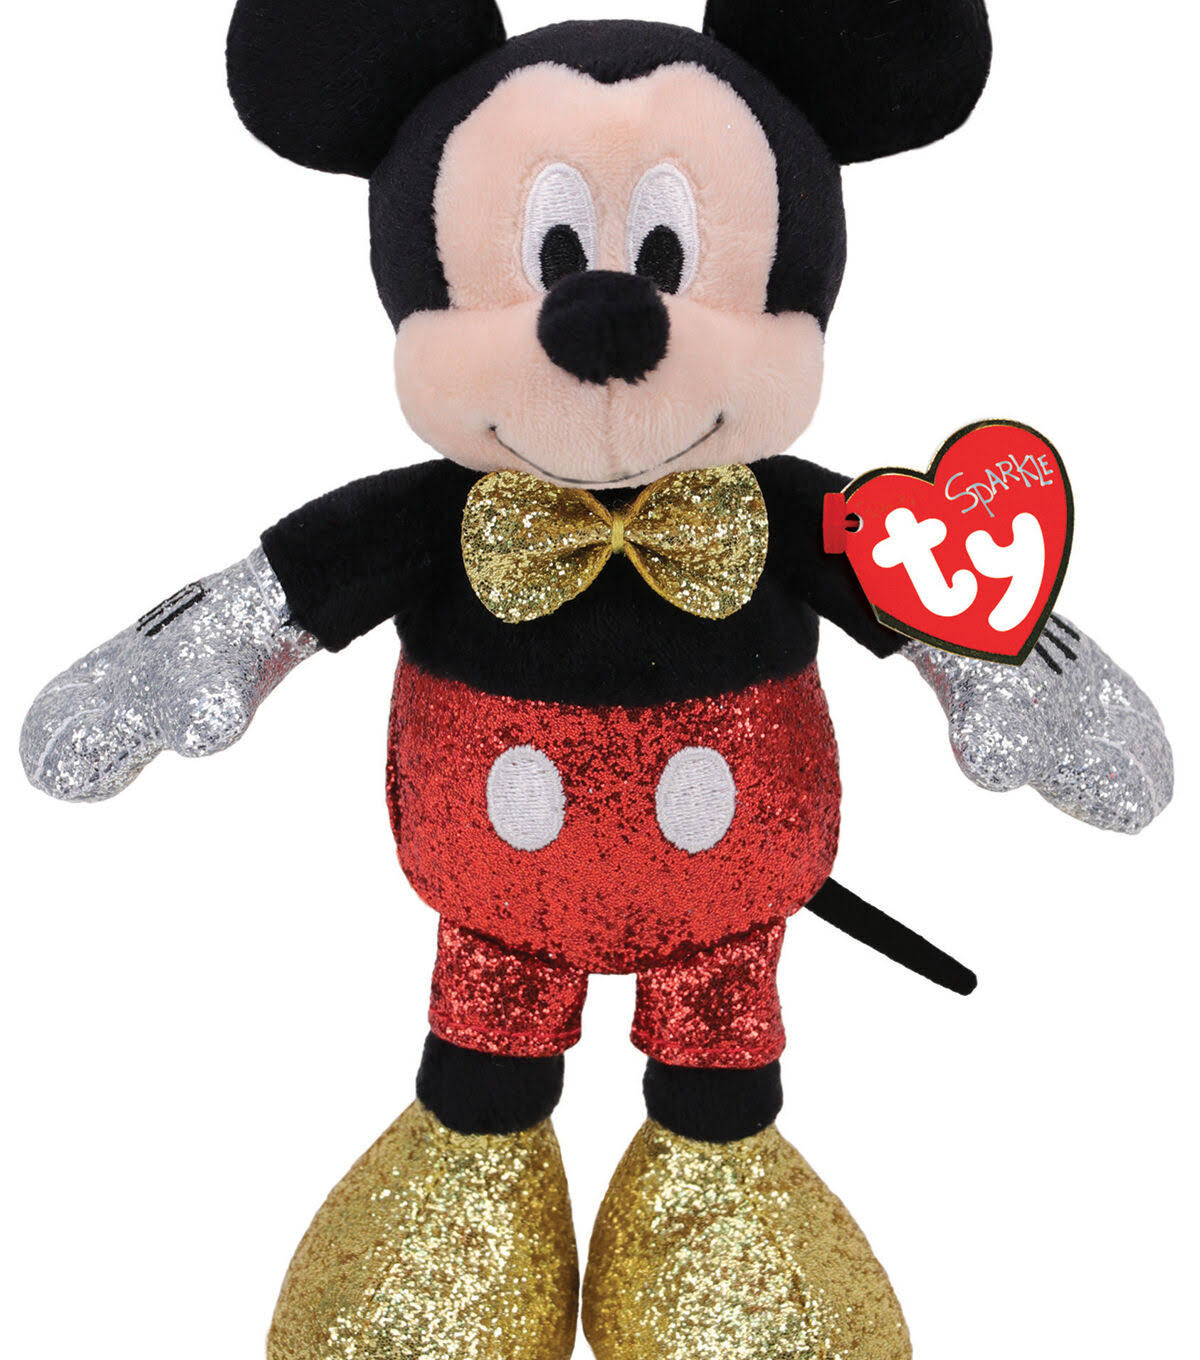 TY Sparkle Mickey Mouse